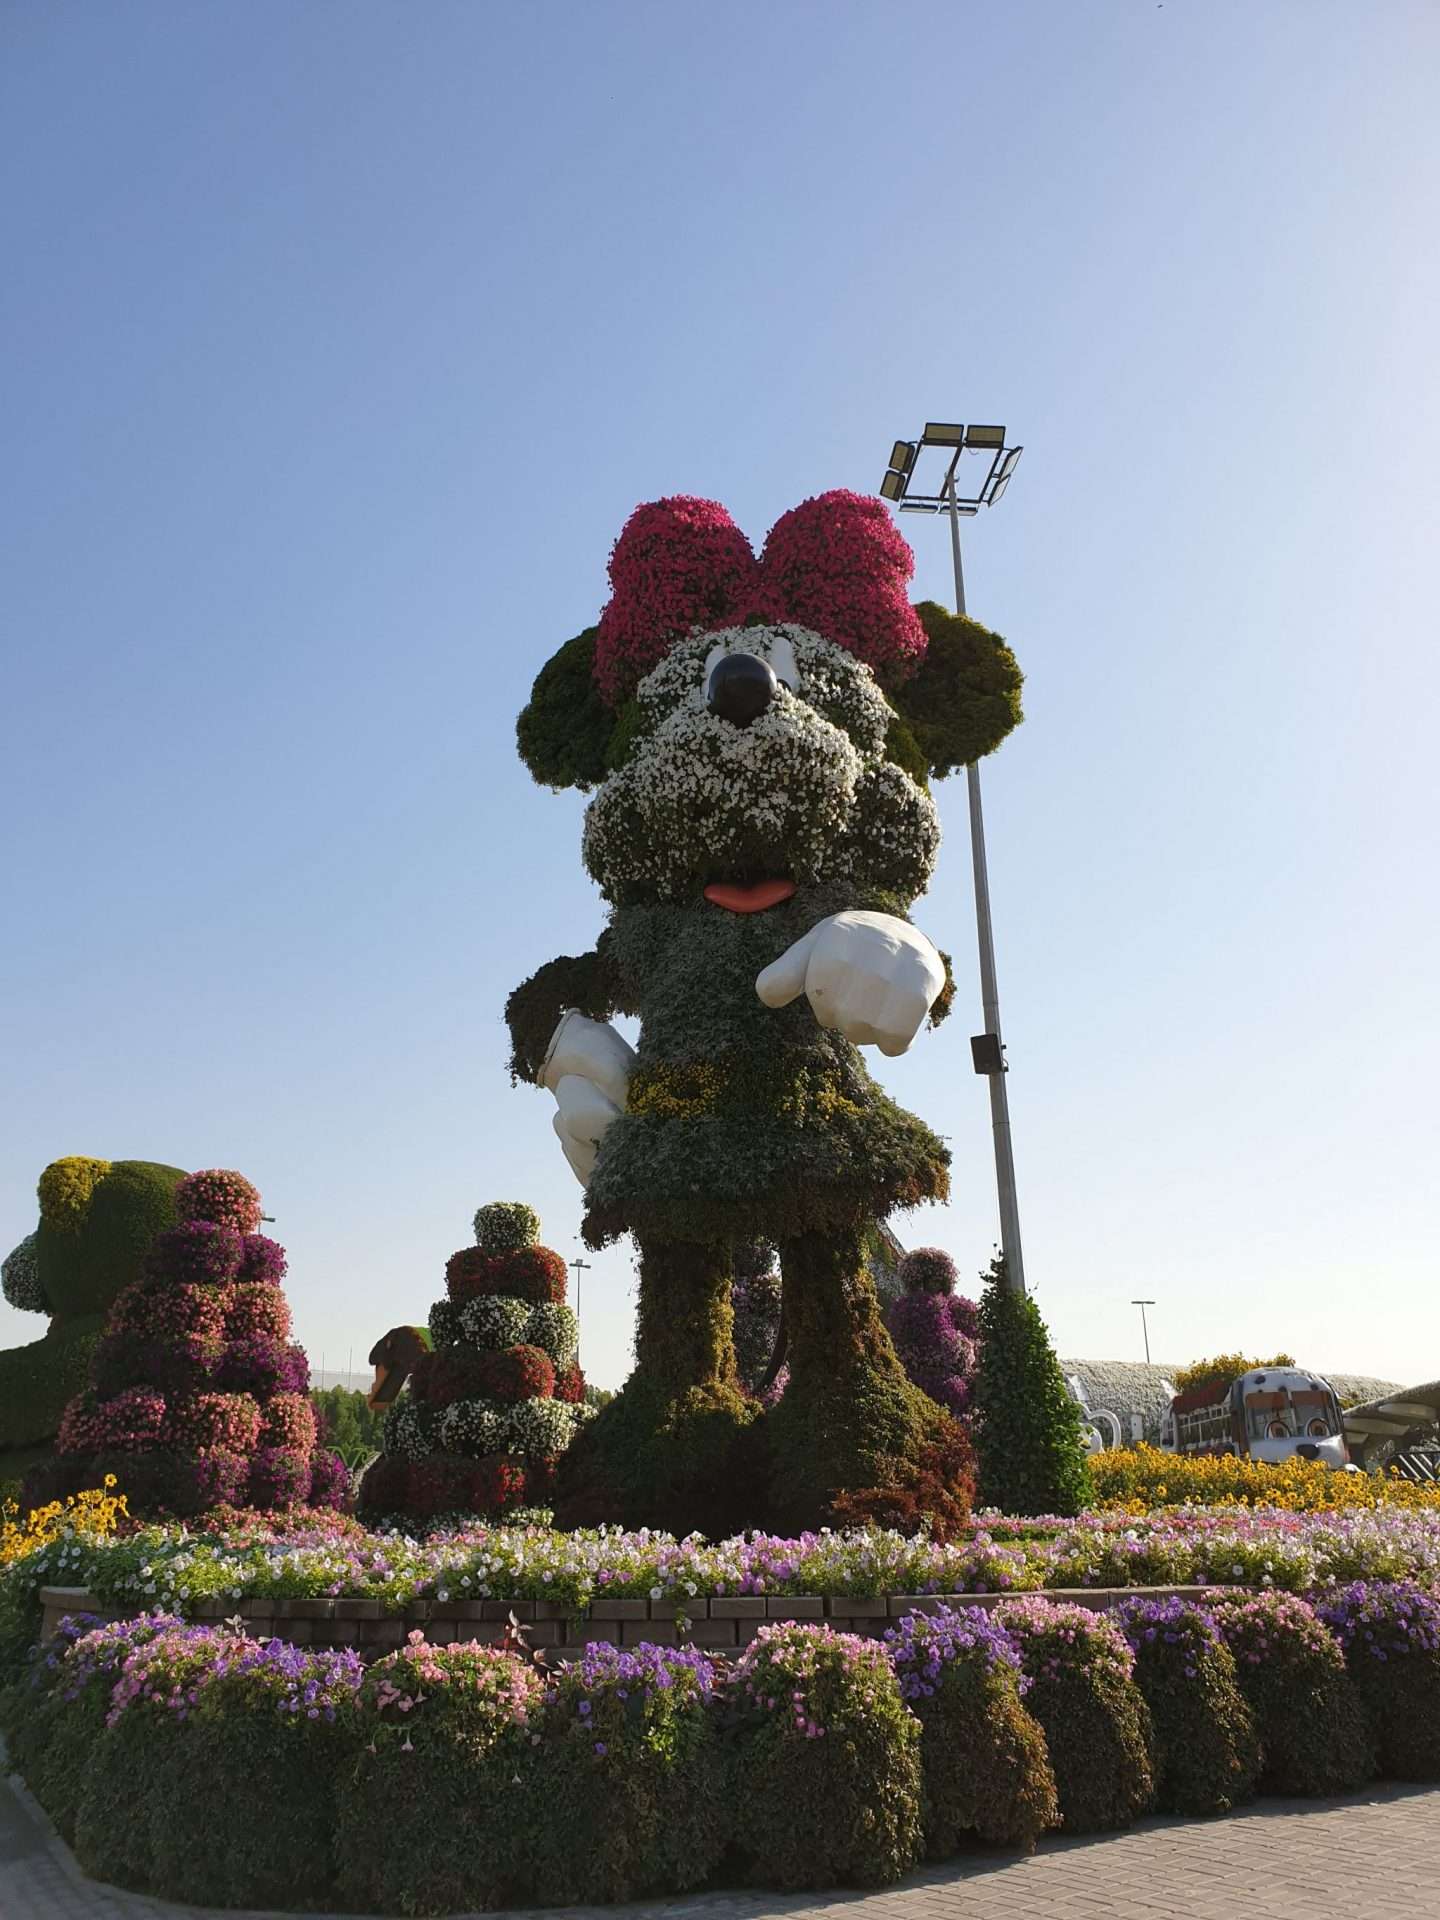 Minnie Mouse at Dubai's Miracle Garden